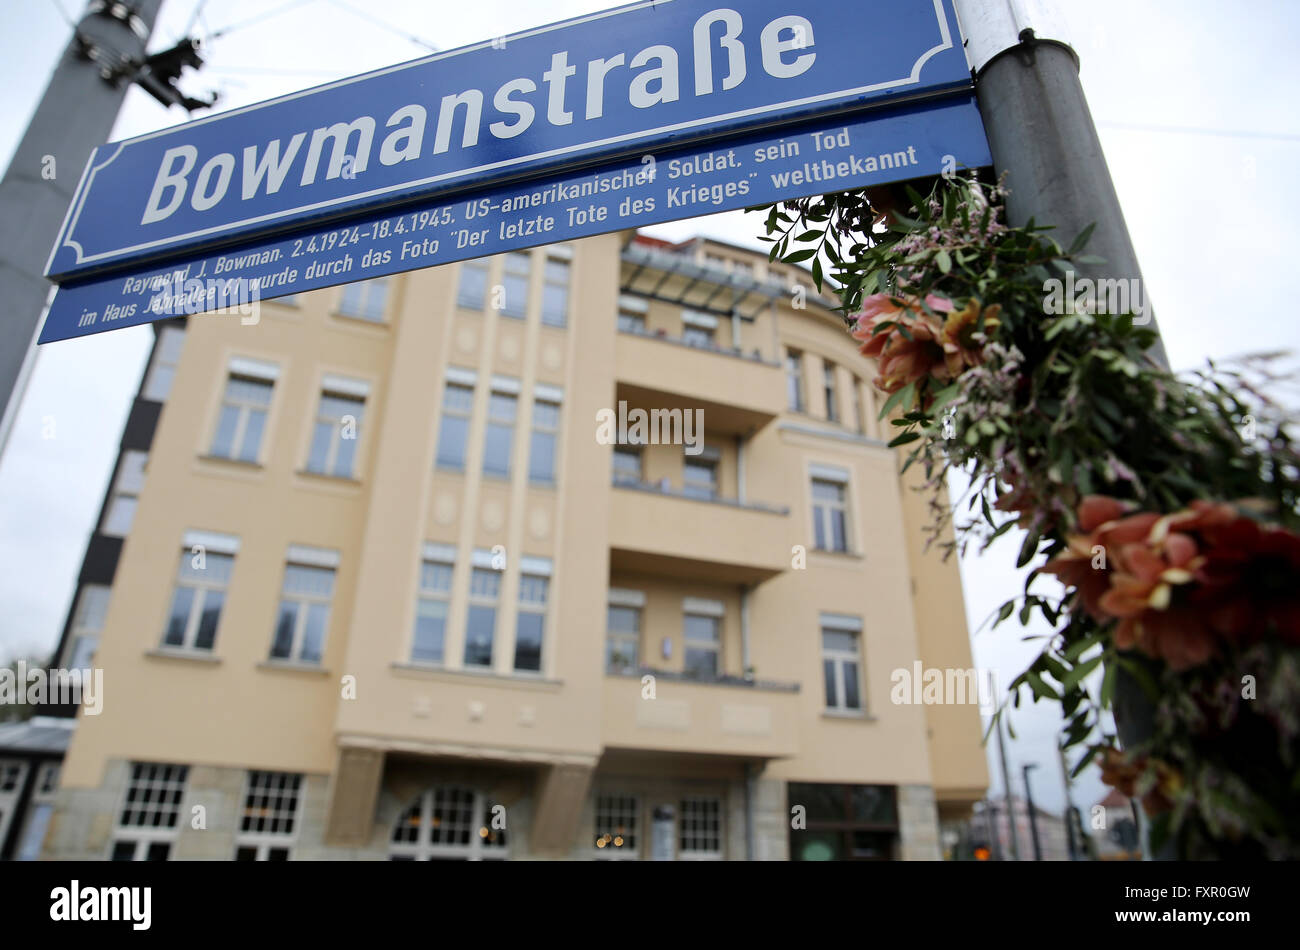 A sign for a street named after a dead US soldier named Bowman pictured in front of the Capa House in Leipzig, Germany, 17 April 2016. The building, now also known as Capa House, became famous internationally through the picture 'Last man to die' by US war photographer Robert Capa. He documented how US soldier Raymond J. Bowman was shot dead on the second floor balcony on 18 April 1945 as US forces liberated Leipzig. The building was overhauled after years of decay, with an exhibition now showcasing the history of the building. Photo: JAN WOITAS/dpa Stock Photo